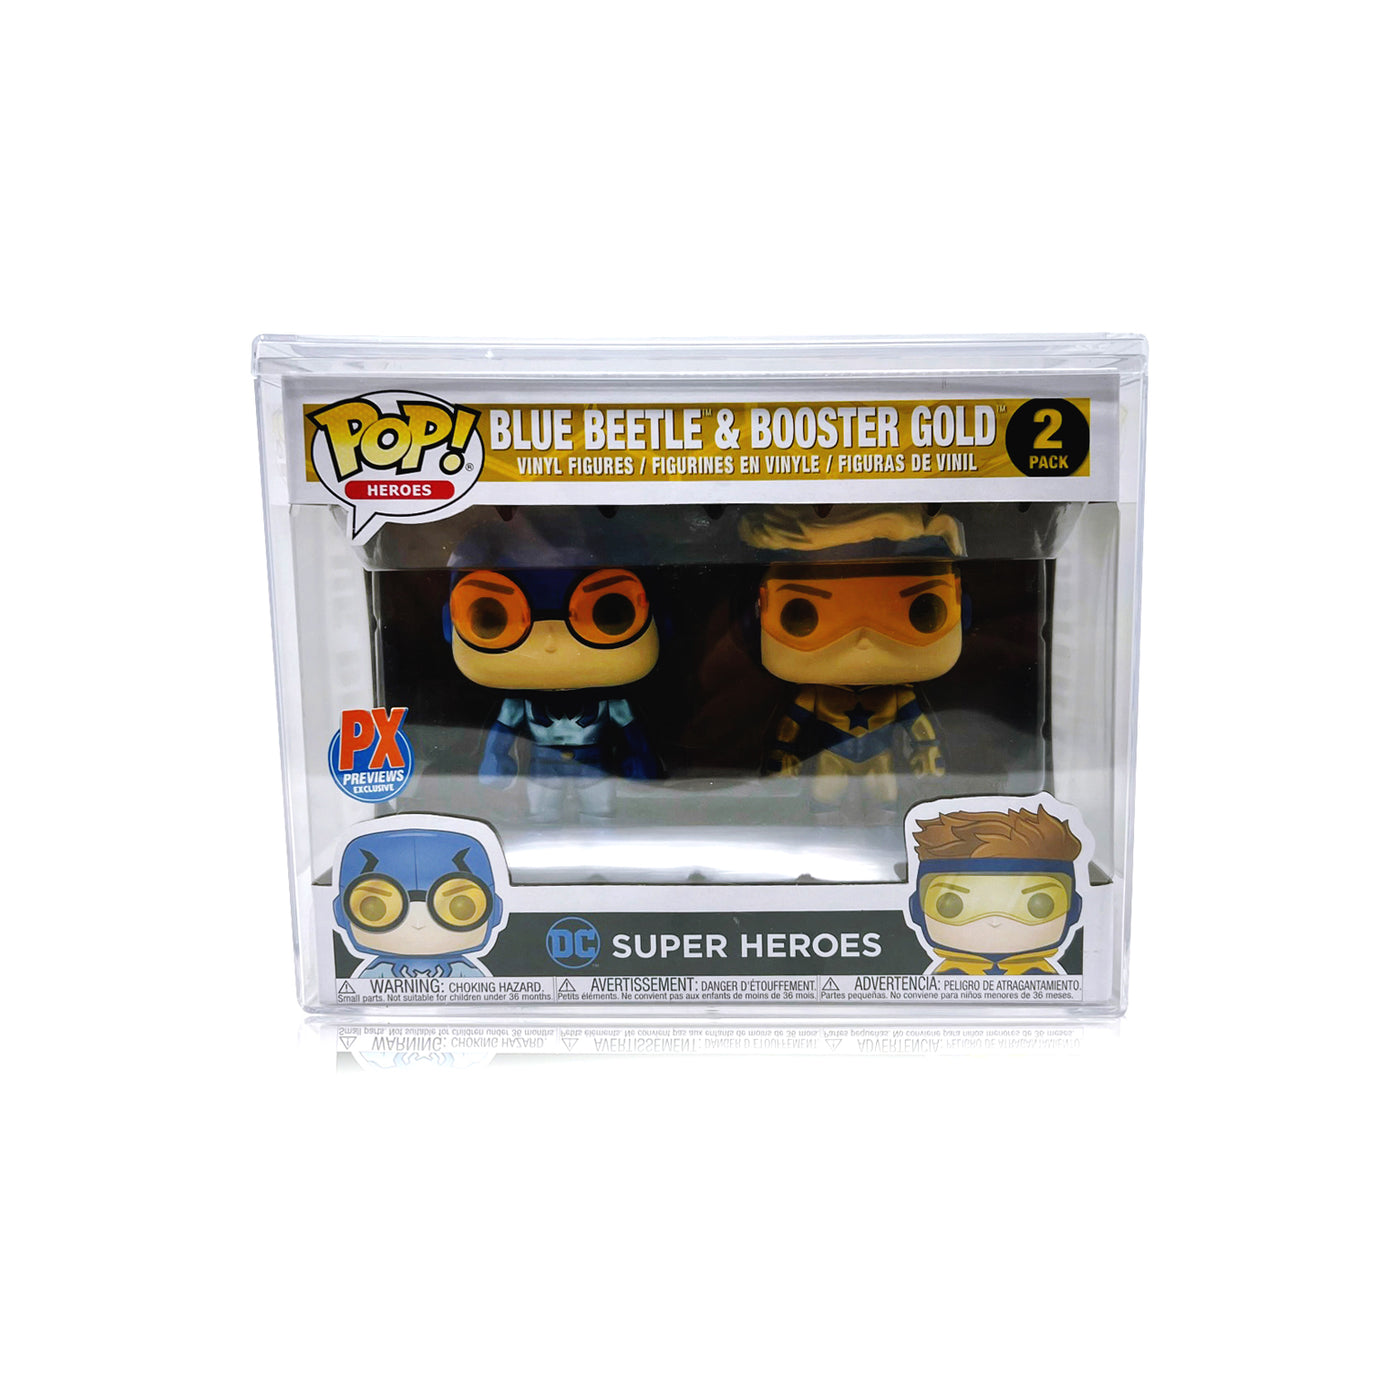 Protectors(Acrylic) For 2-Pack Funko POP! Figures